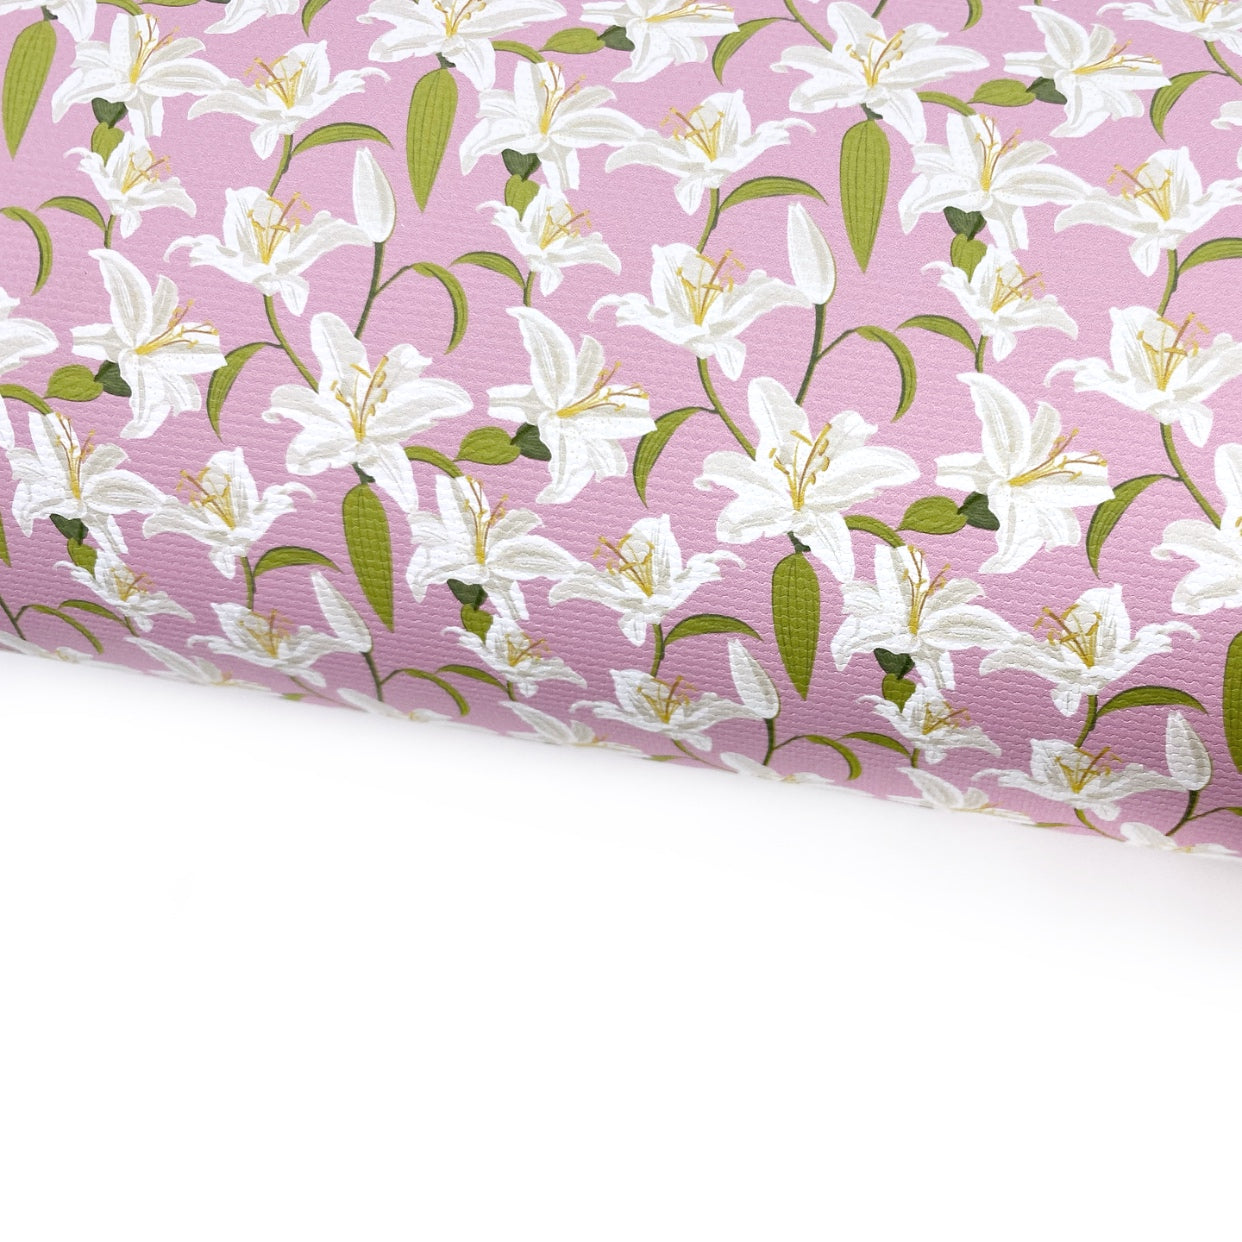 Mums Favourite Lillies Floral Lux Premium Printed Bow Fabric